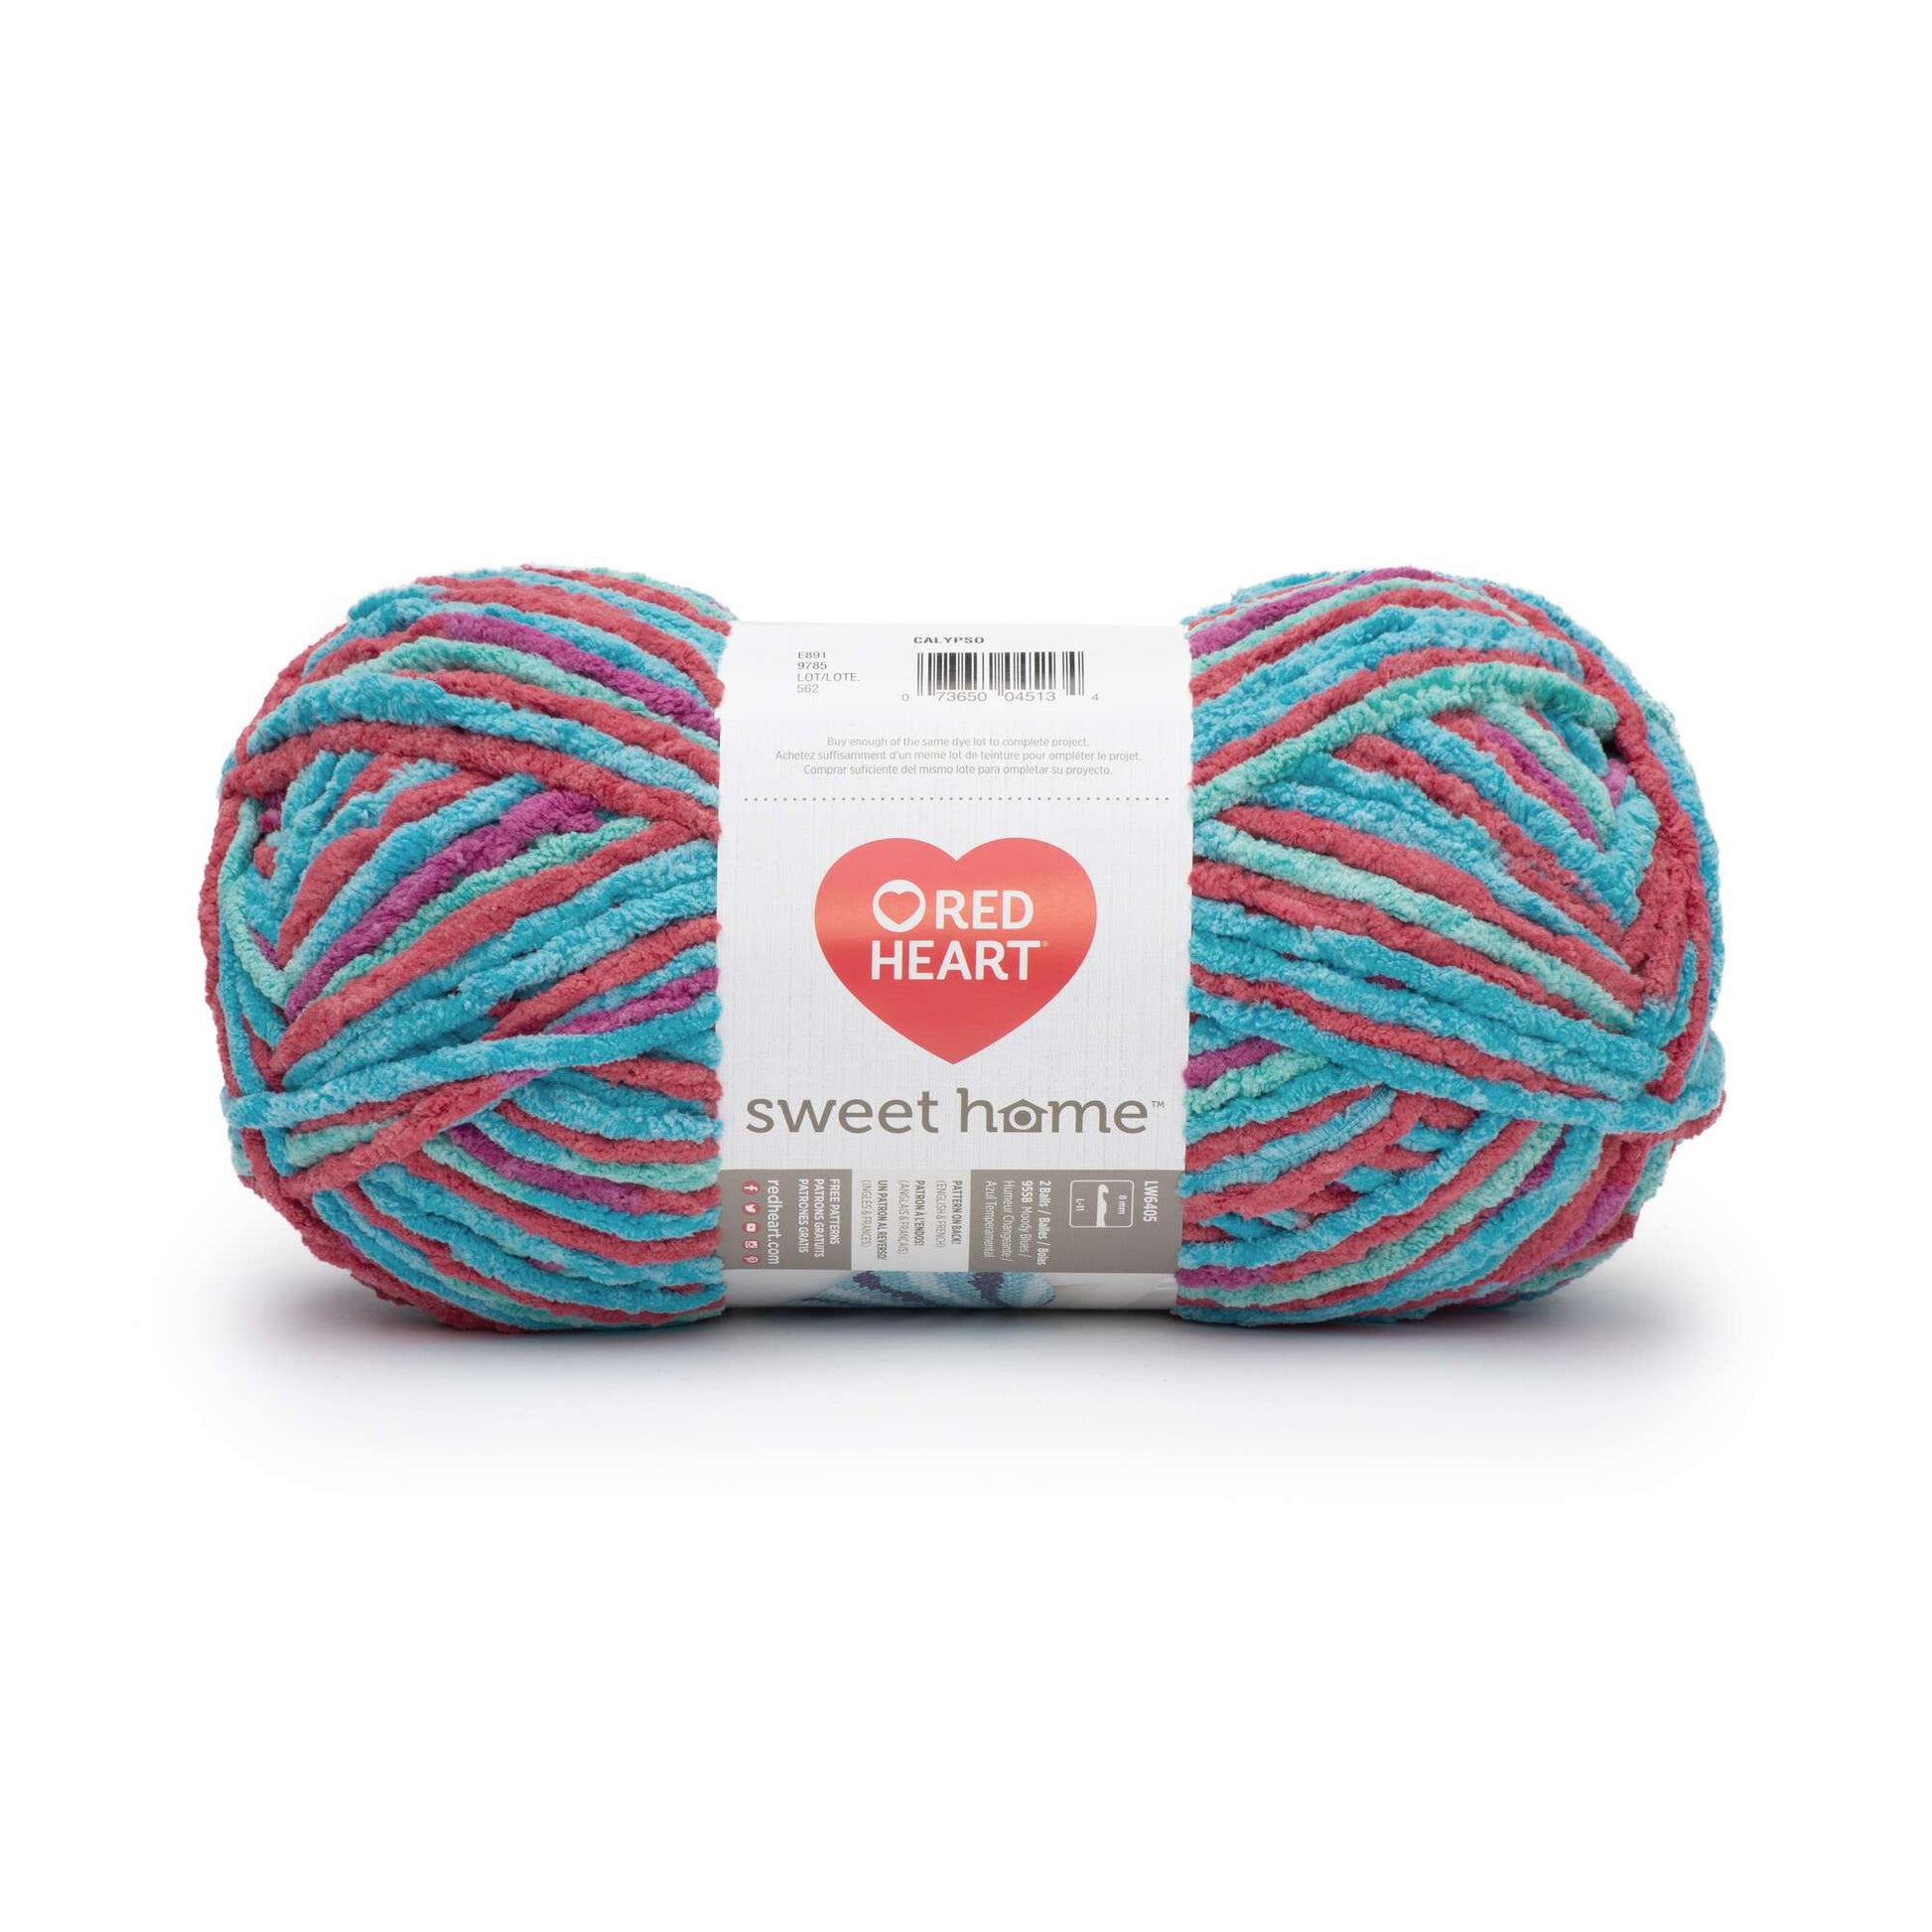 Red Heart Sweet Home Yarn - Discontinued Shades